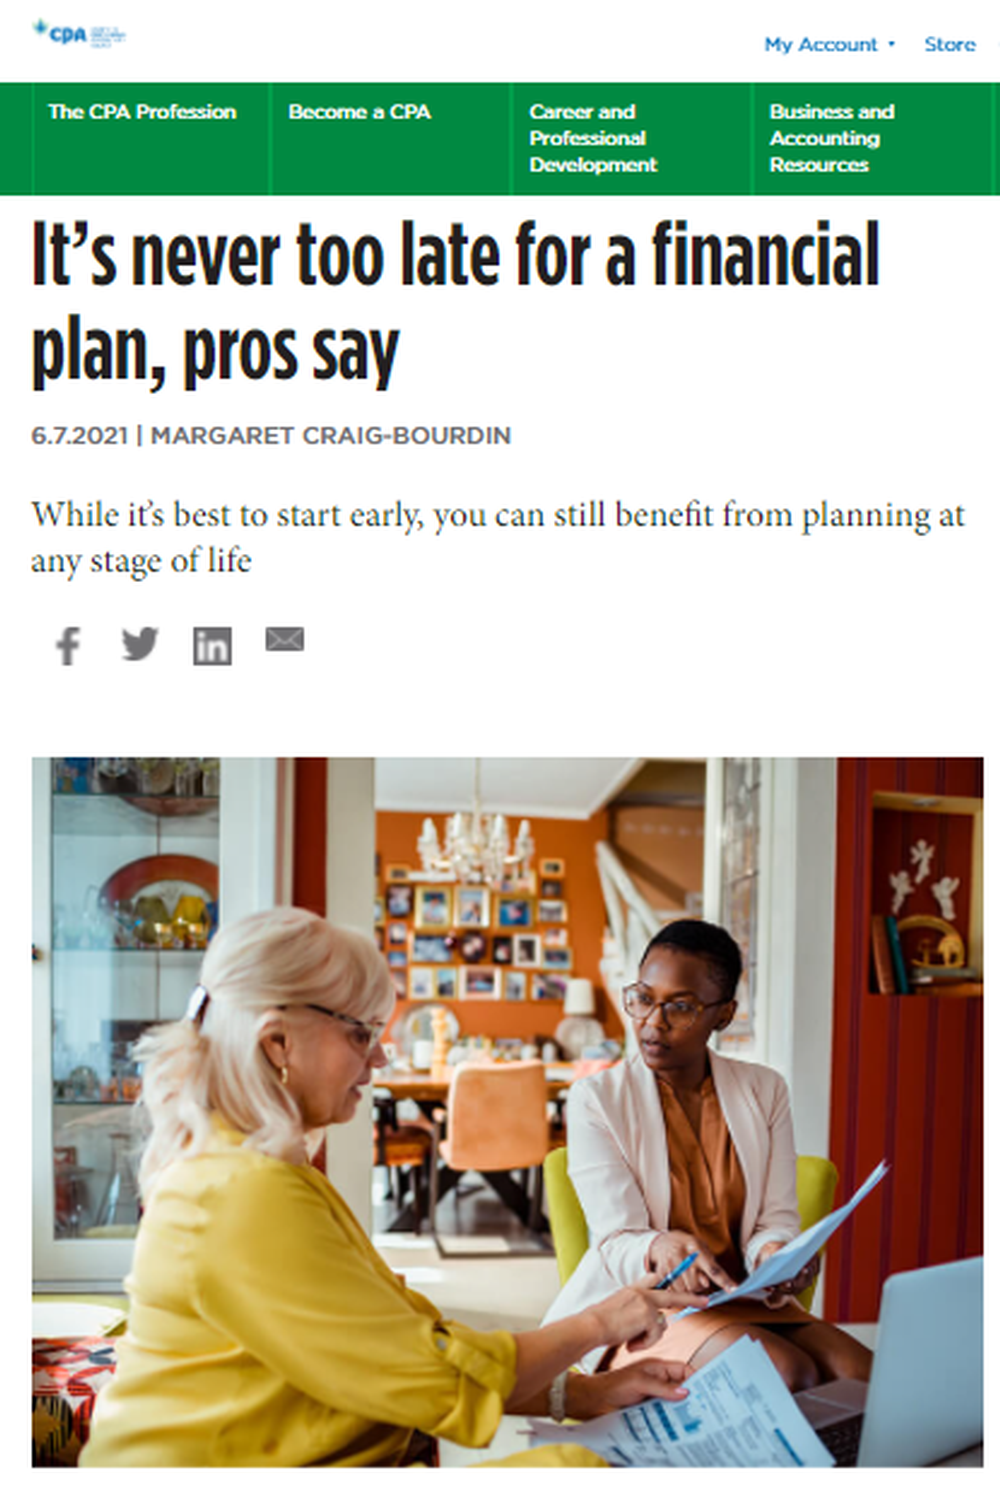 It’s-never-too-late-for-a-financial-plan-pros-say.png